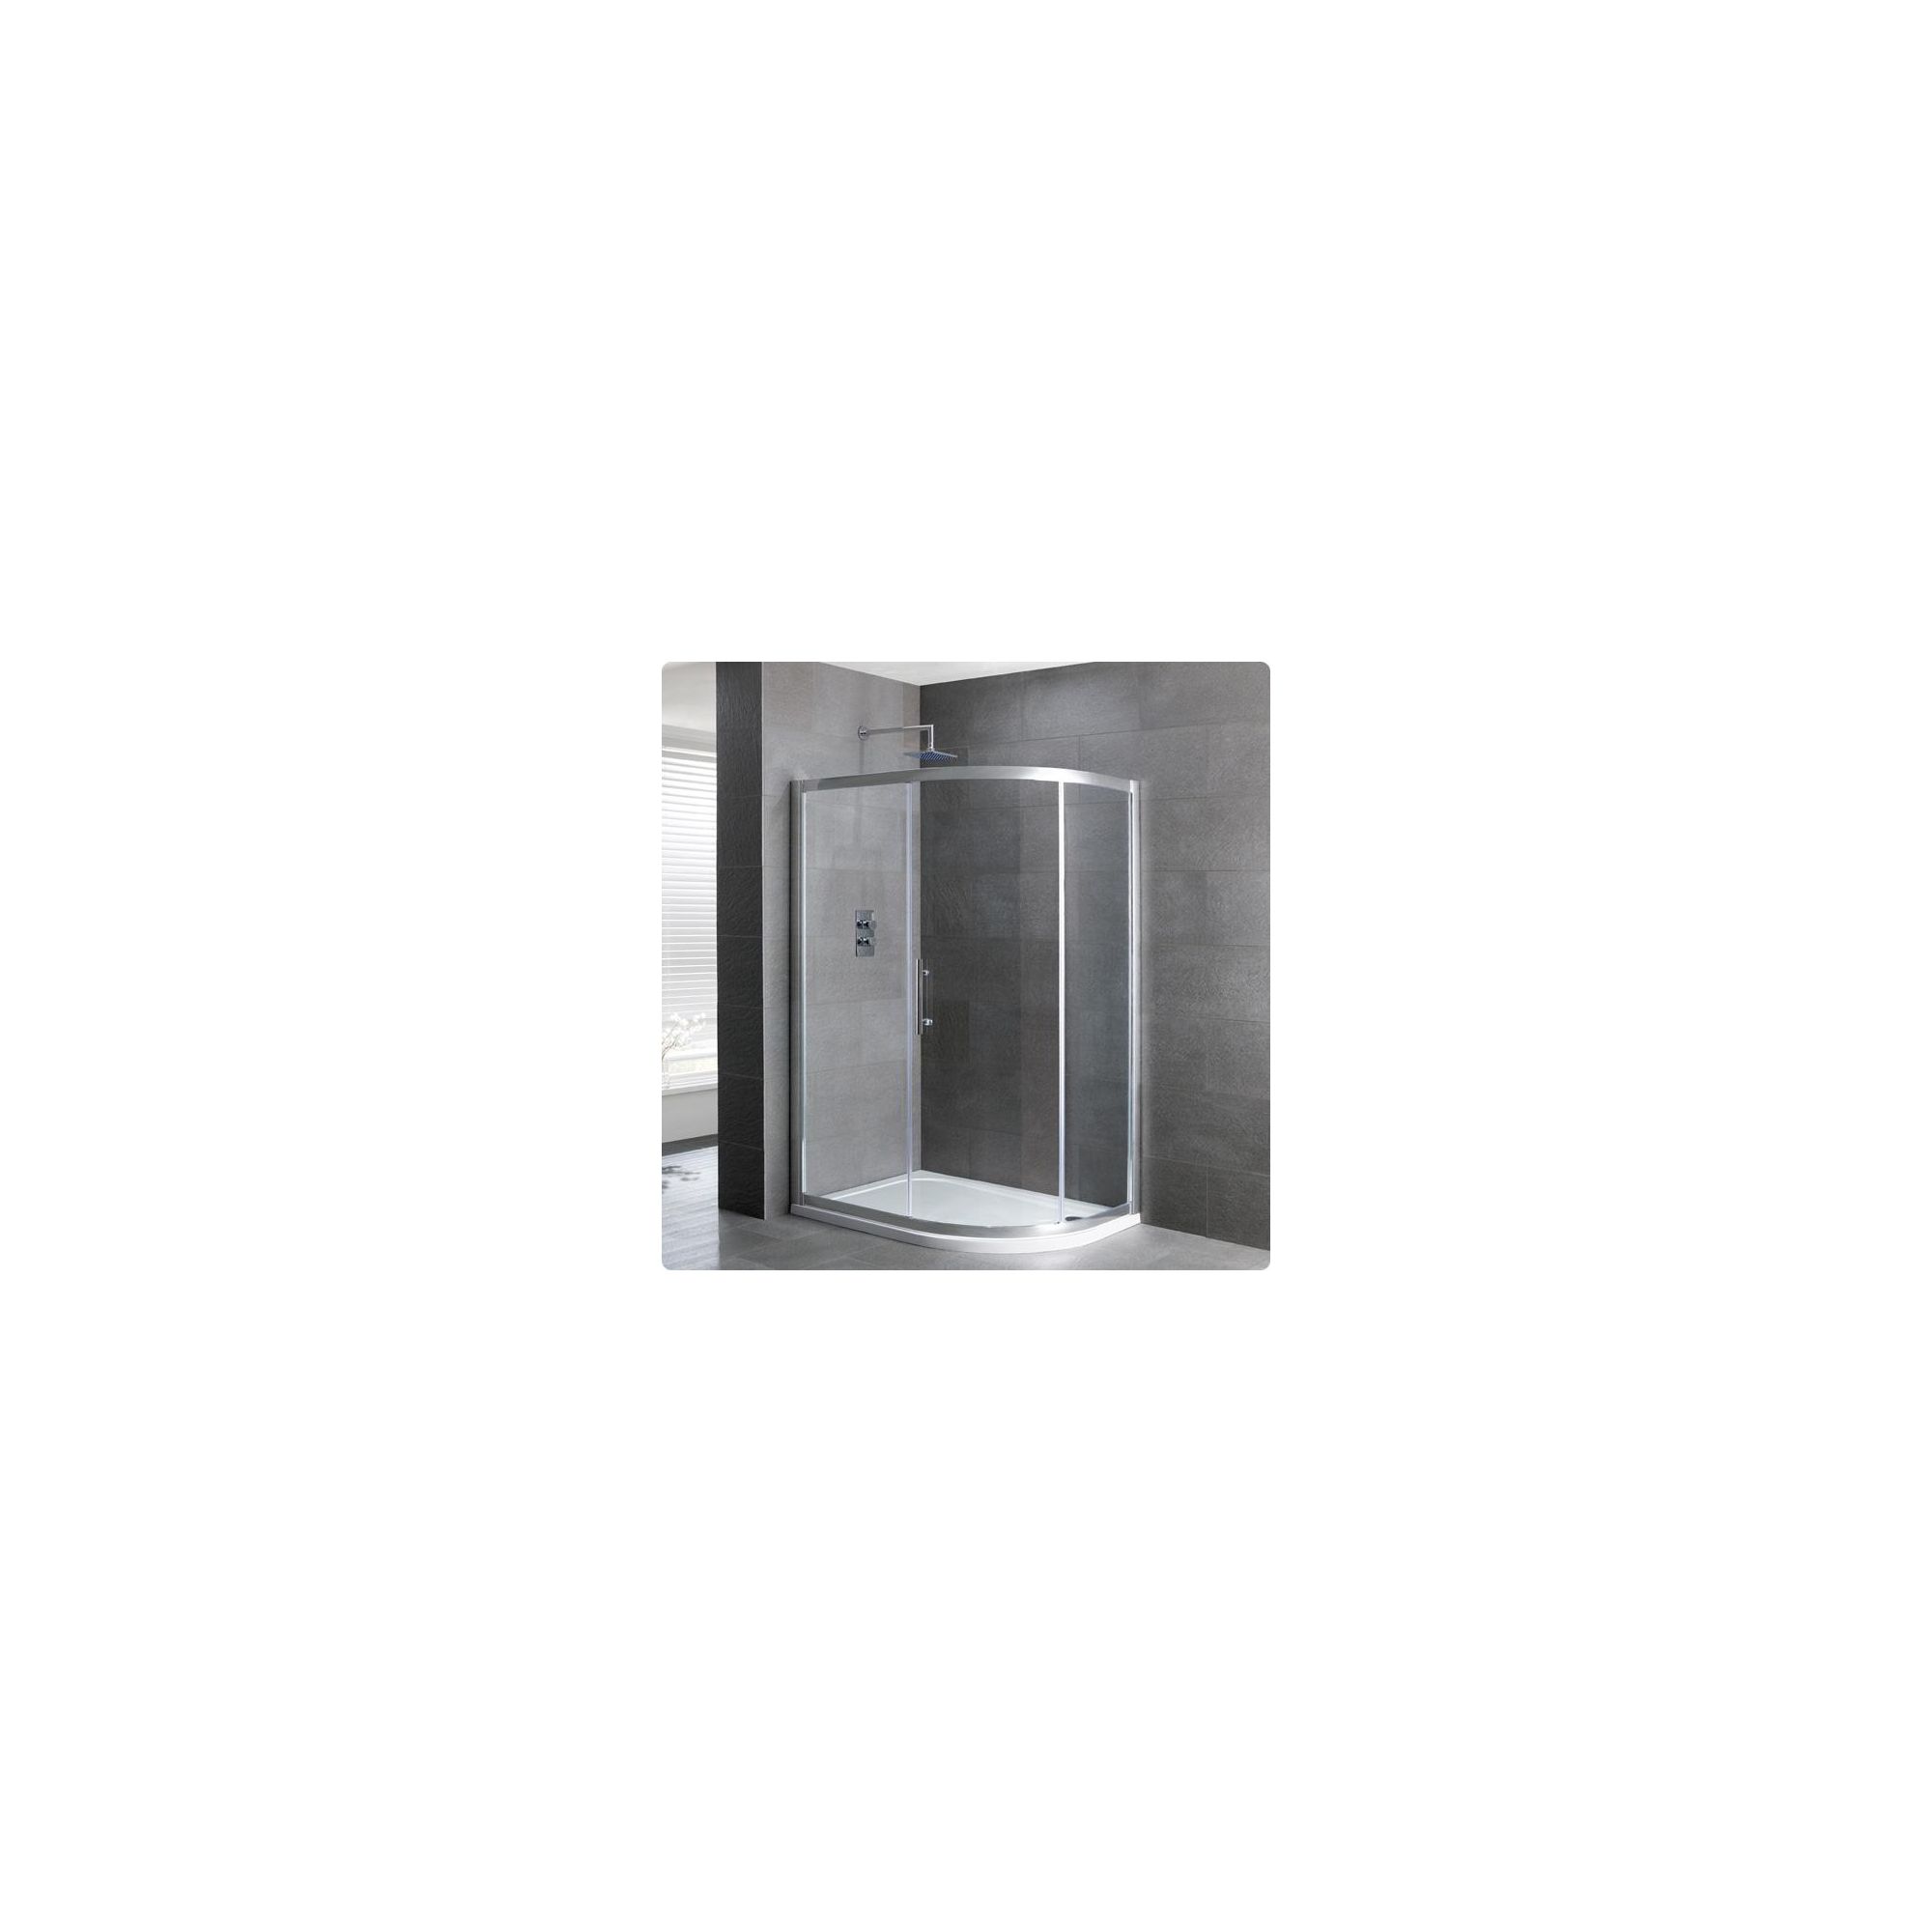 Duchy Select Silver 1 Door Offset Quadrant Shower Enclosure 1200mm x 800mm, Standard Tray, 6mm Glass at Tescos Direct